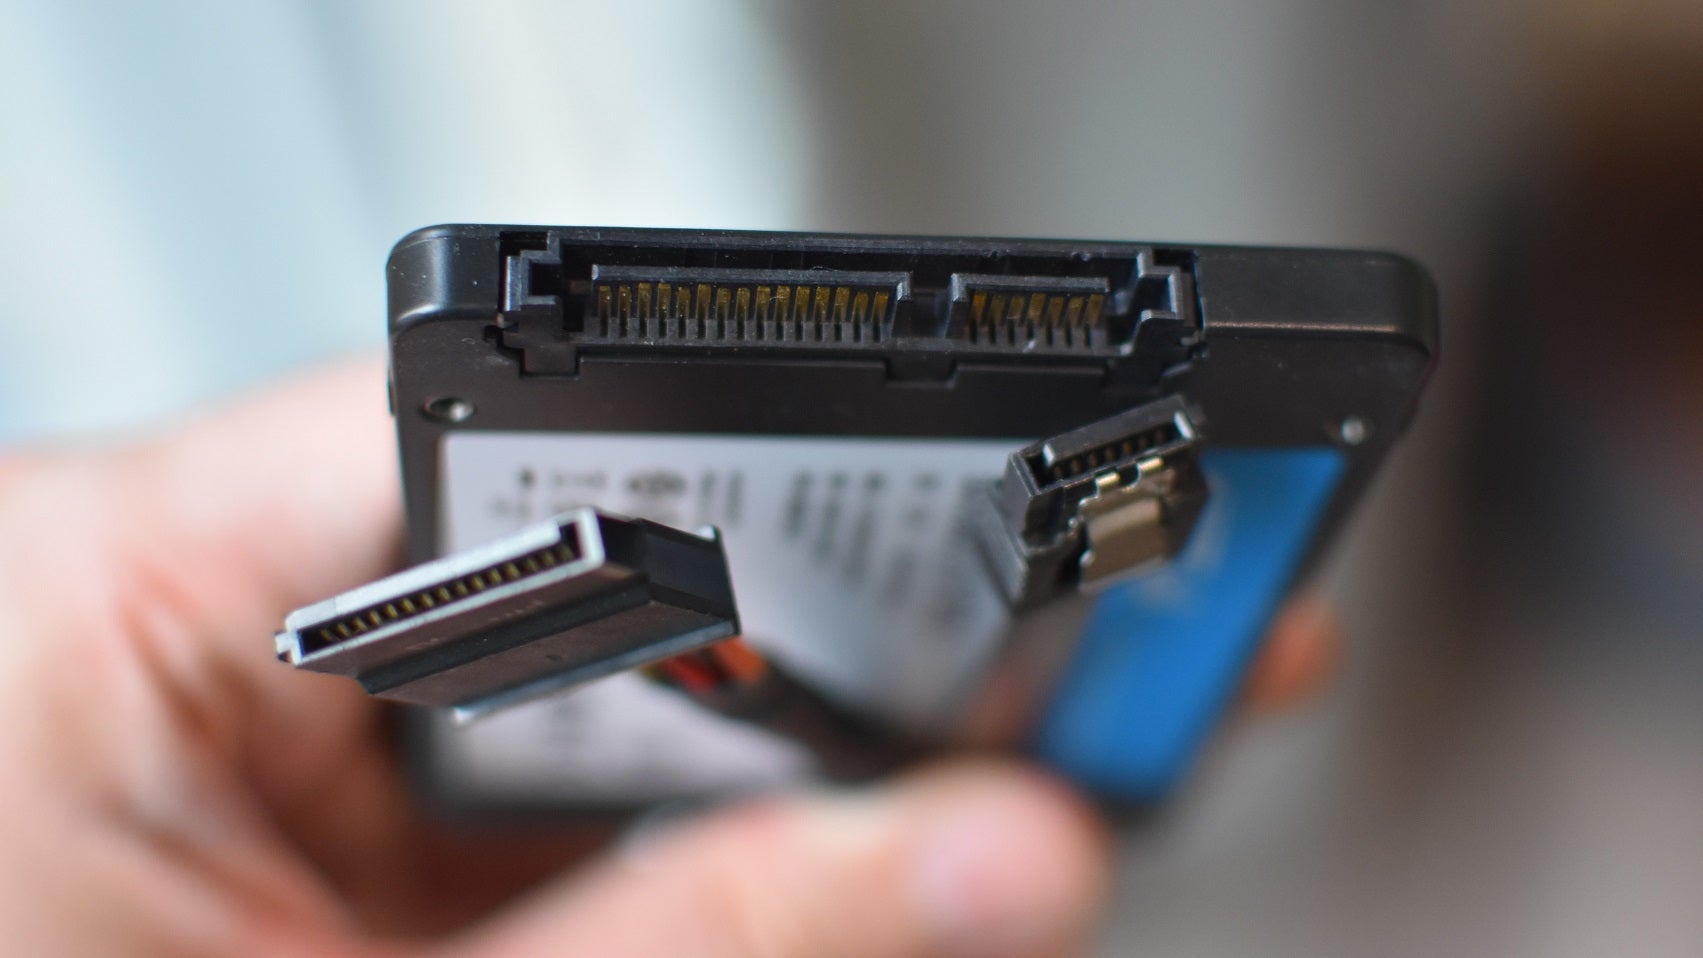 A 2.5in SSD's connection ports, held next to the corresponding power and data cables.